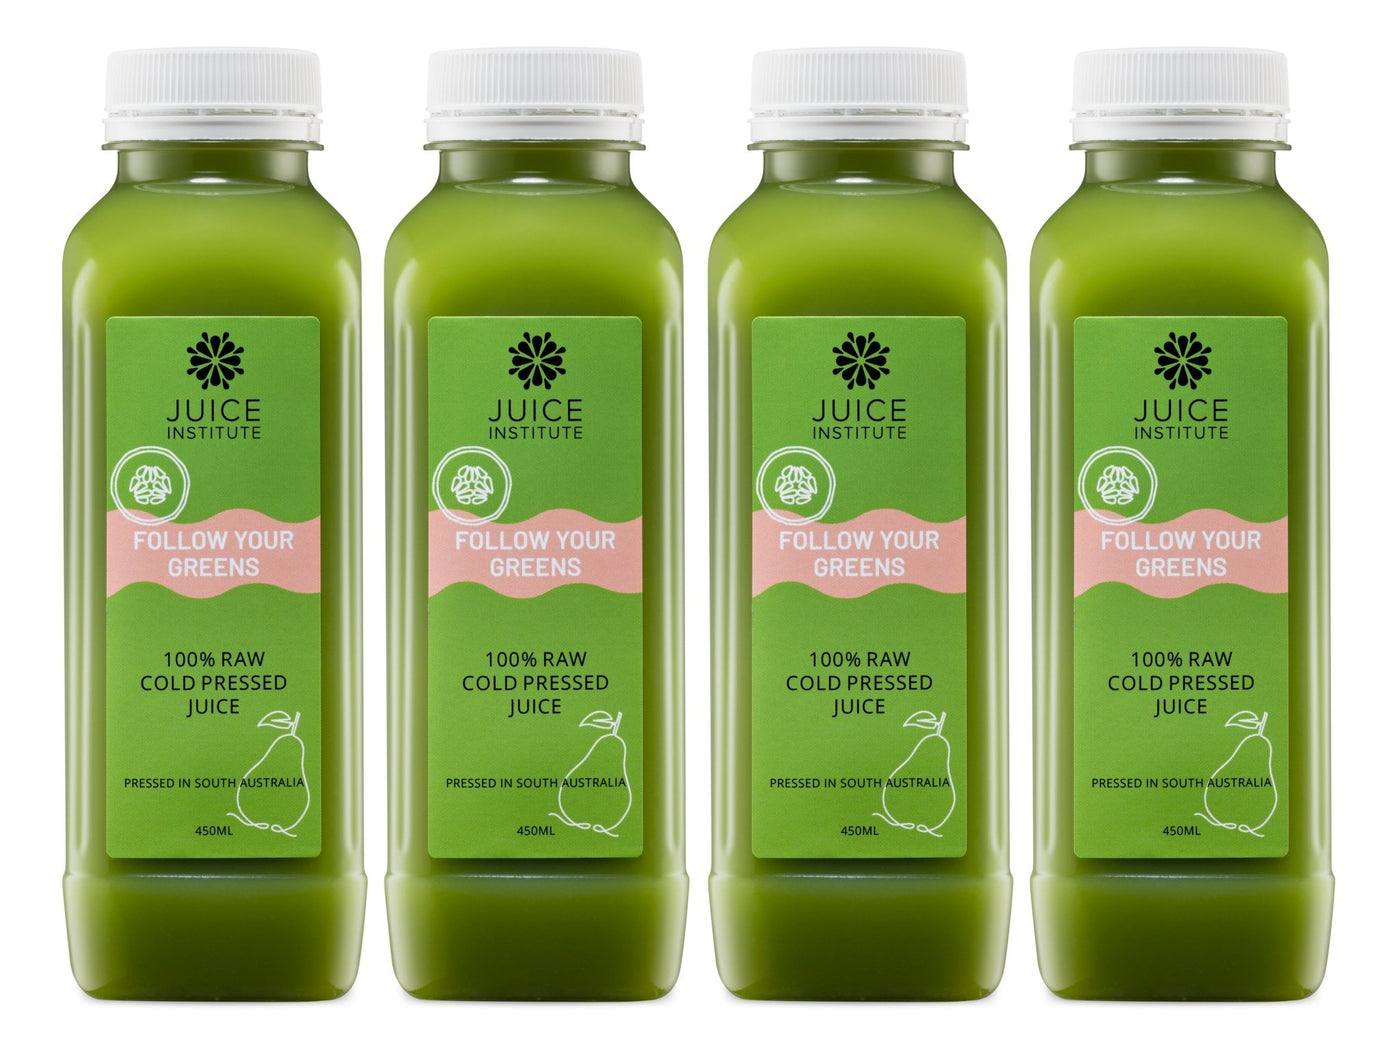 Follow Your Greens Box - Juice Institute